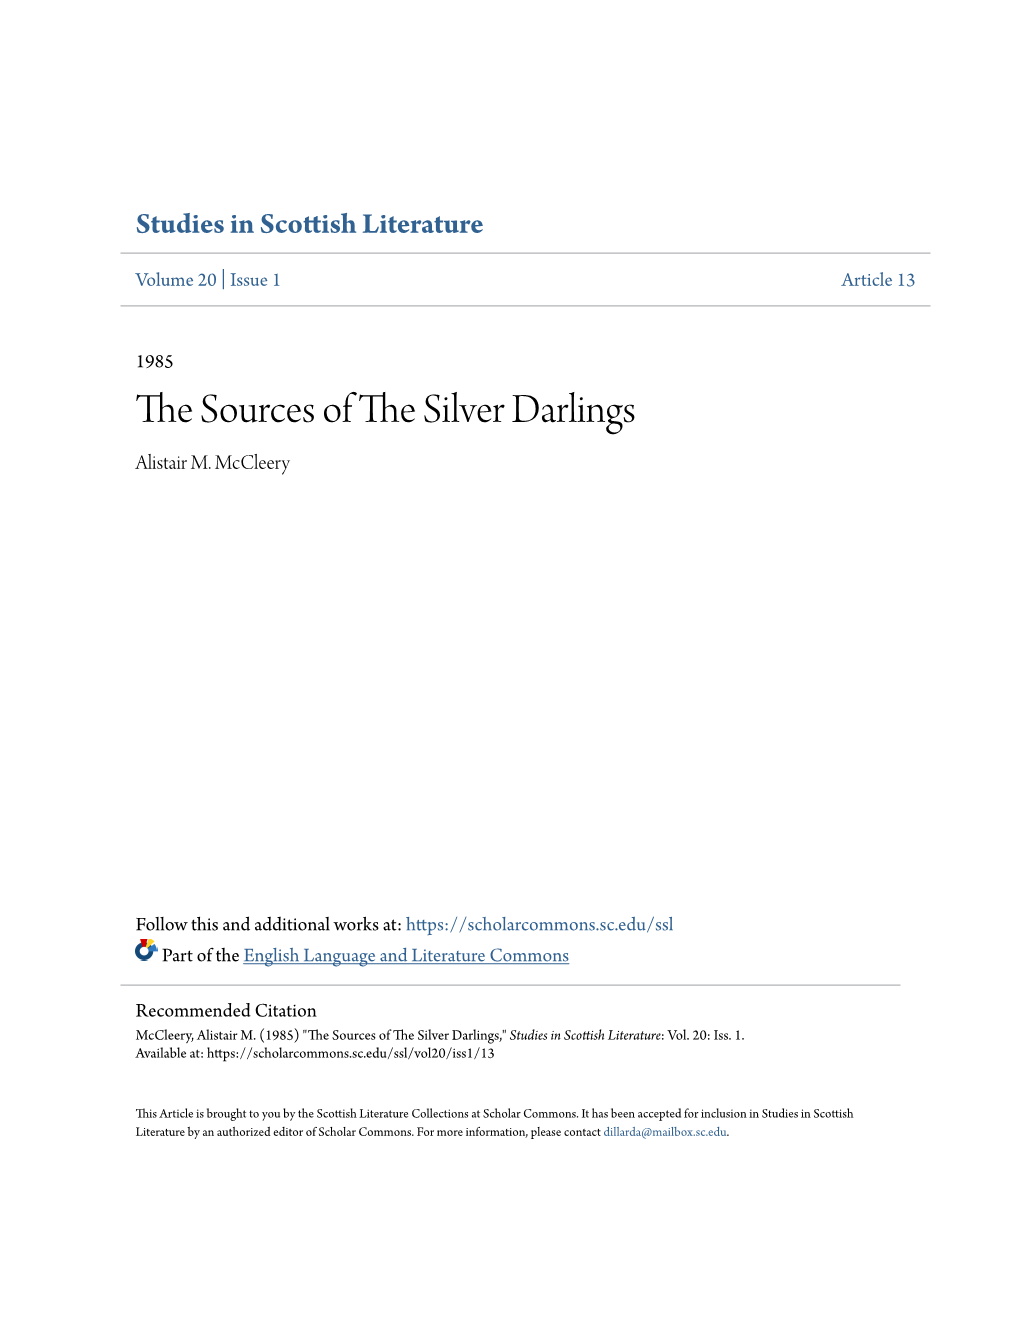 The Sources of the Silver Darlings